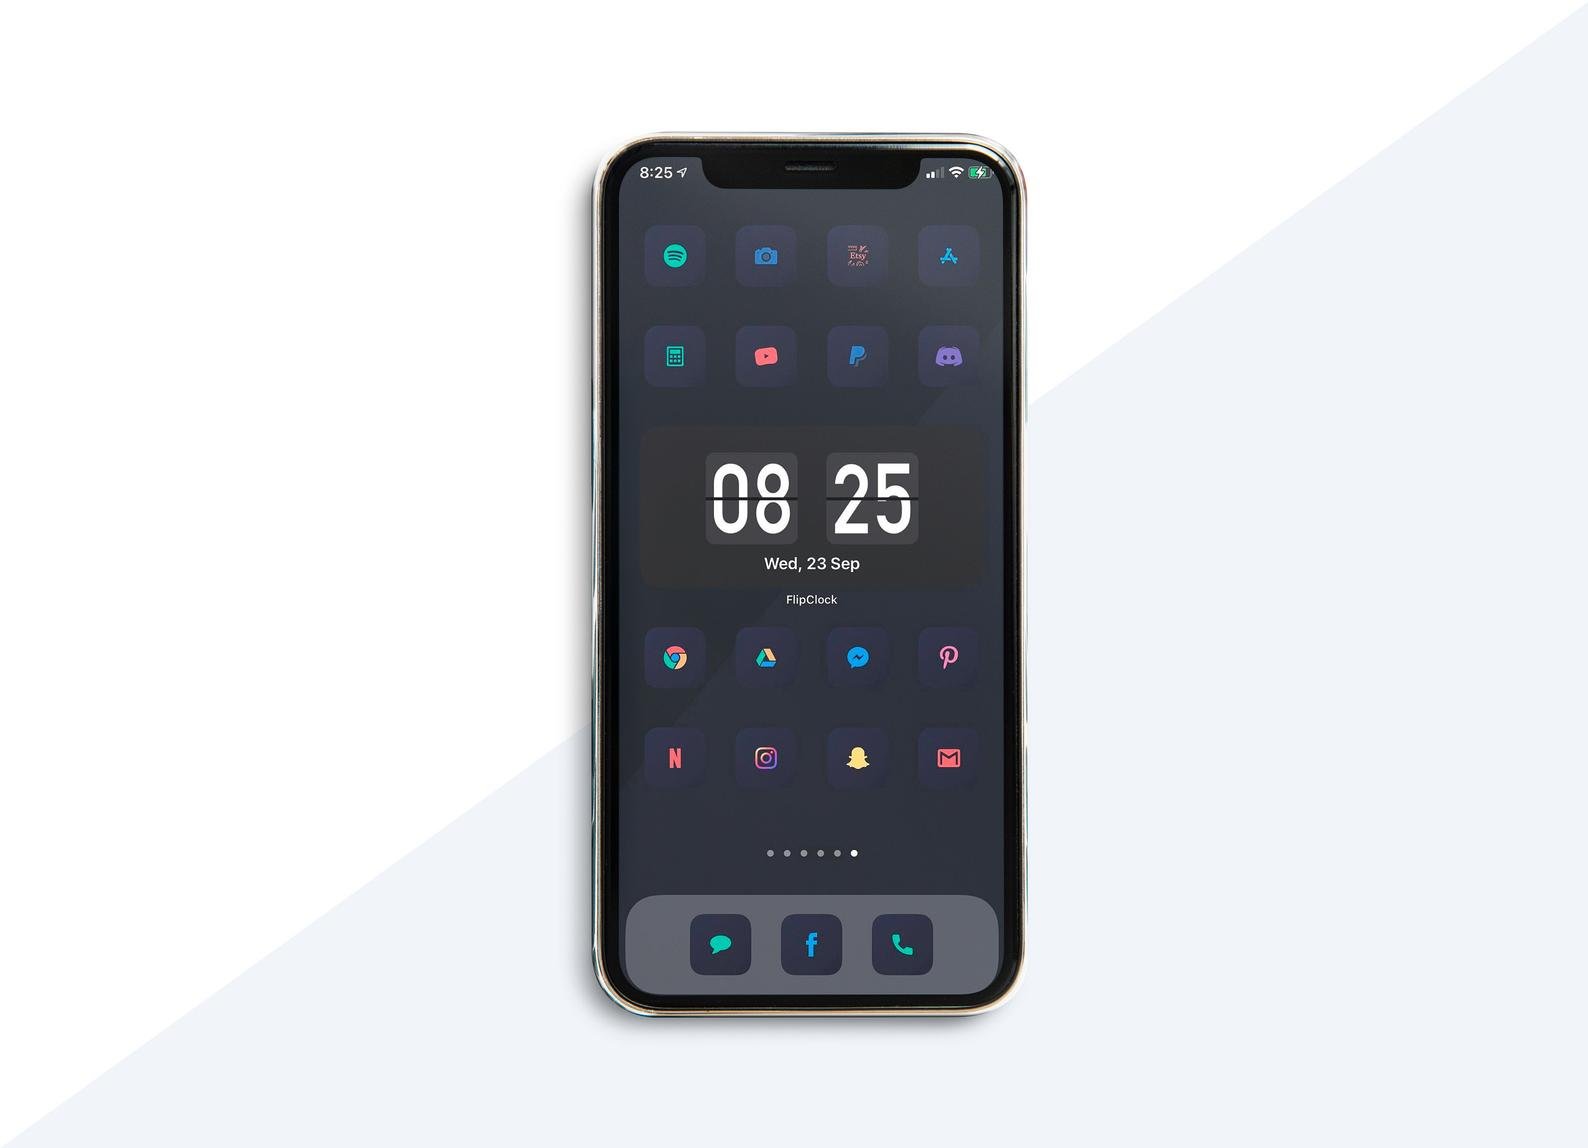 iOS 14 Aesthetic Icon Set Dark Color Icons 48 icons Icons image 0 iOS 14 Aesthetic Icon Set Dark Color Icons 48 icons Icons image 1 iOS 14 Aesthetic Icon Set Dark Color Icons 48 icons Icons image 2 iOS 14 Aesthetic Icon Set Dark Color Icons 48 icons Icons image 3 iOS 14 Aesthetic Icon Set Dark Color Icons 48 icons Icons image 4 workwithstellio 293 sales 293 sales | 5 out of 5 stars iOS 14 Aesthetic Icon Set, Dark, Color